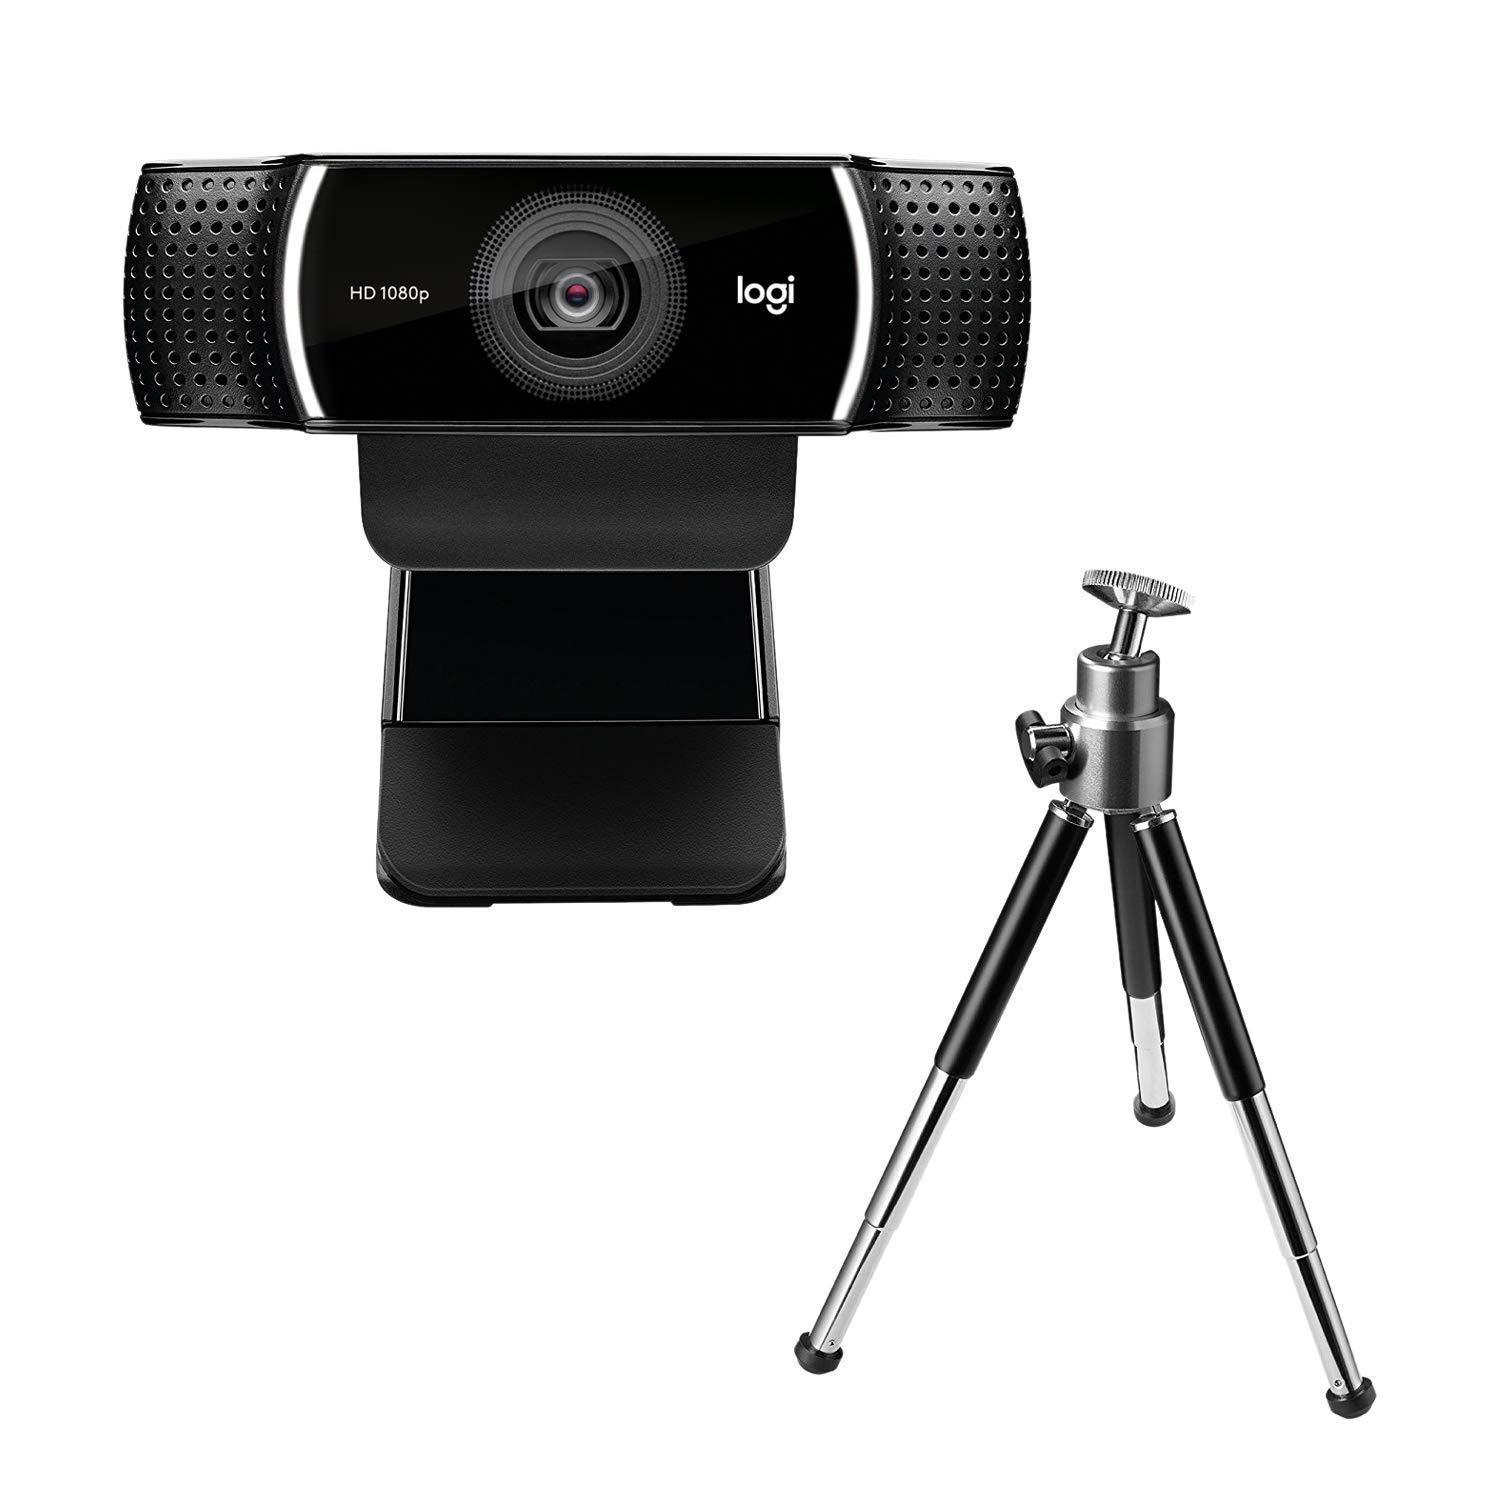 Logitech™ C922 Pro Stream FHD WebCam 960-001090 - WINPROMY CONSULTANCY SDN BHD. (1065242-V) All Rights Reserved.